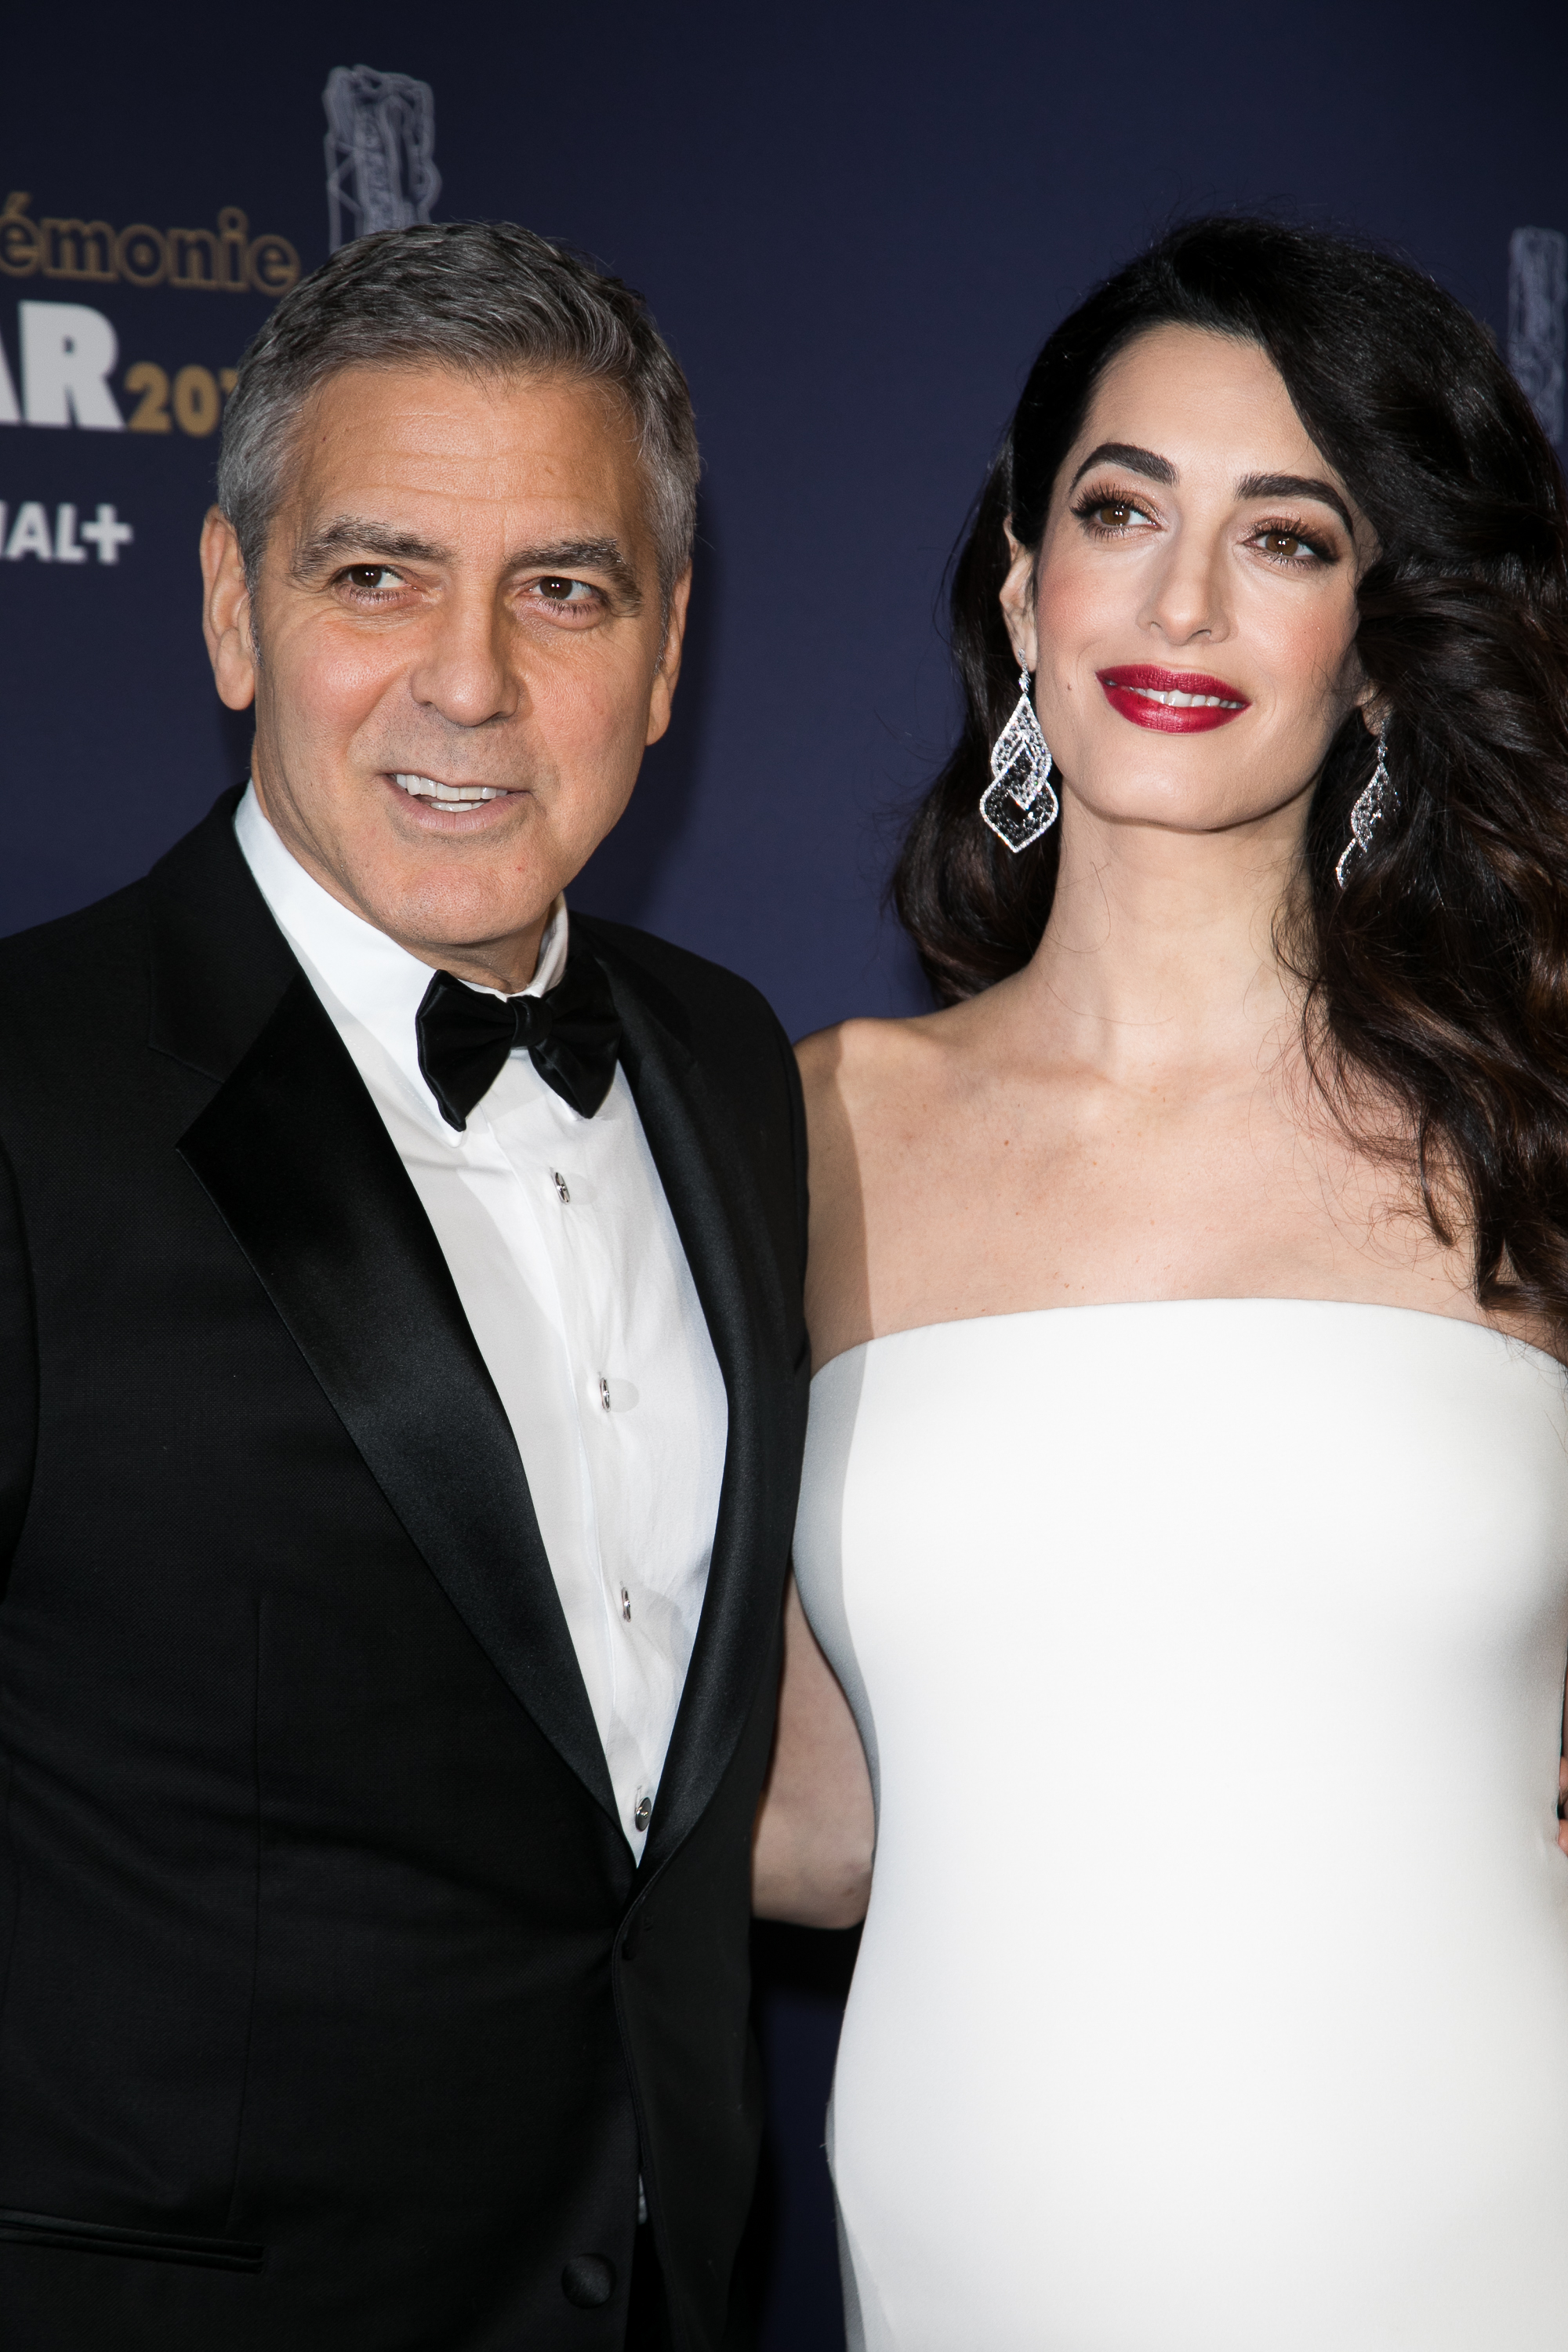 George and Amal Clooney at the Cesar Film Awards in Paris, France on February 24, 2017 | Source: Getty Images